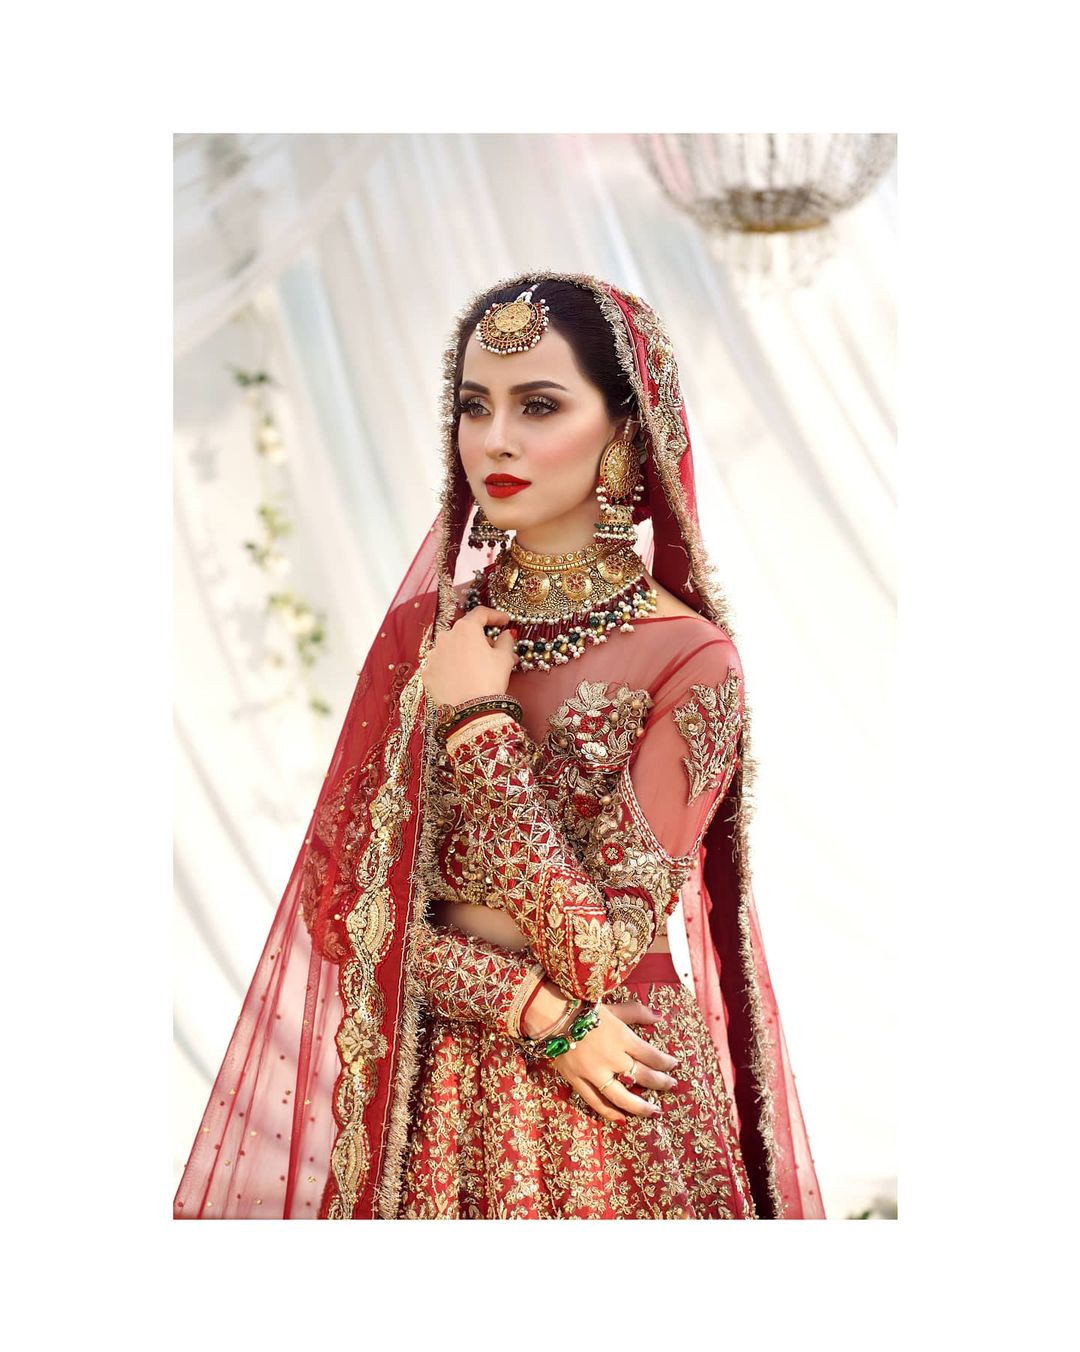 Nimra Khan Leaves Fans Flabbergasted In Her Latest Bridal Photoshoot!